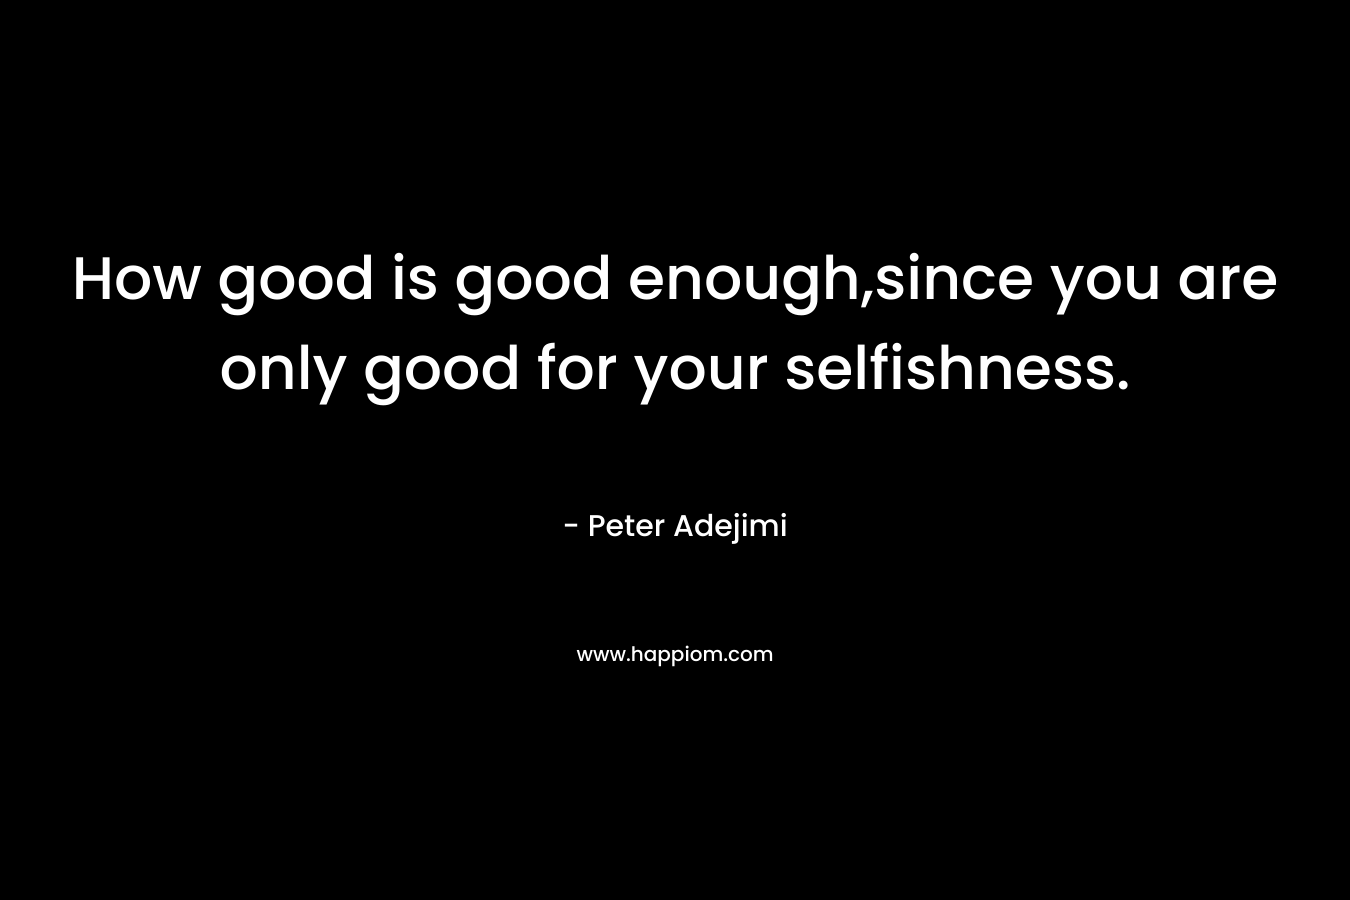 How good is good enough,since you are only good for your selfishness. – Peter Adejimi